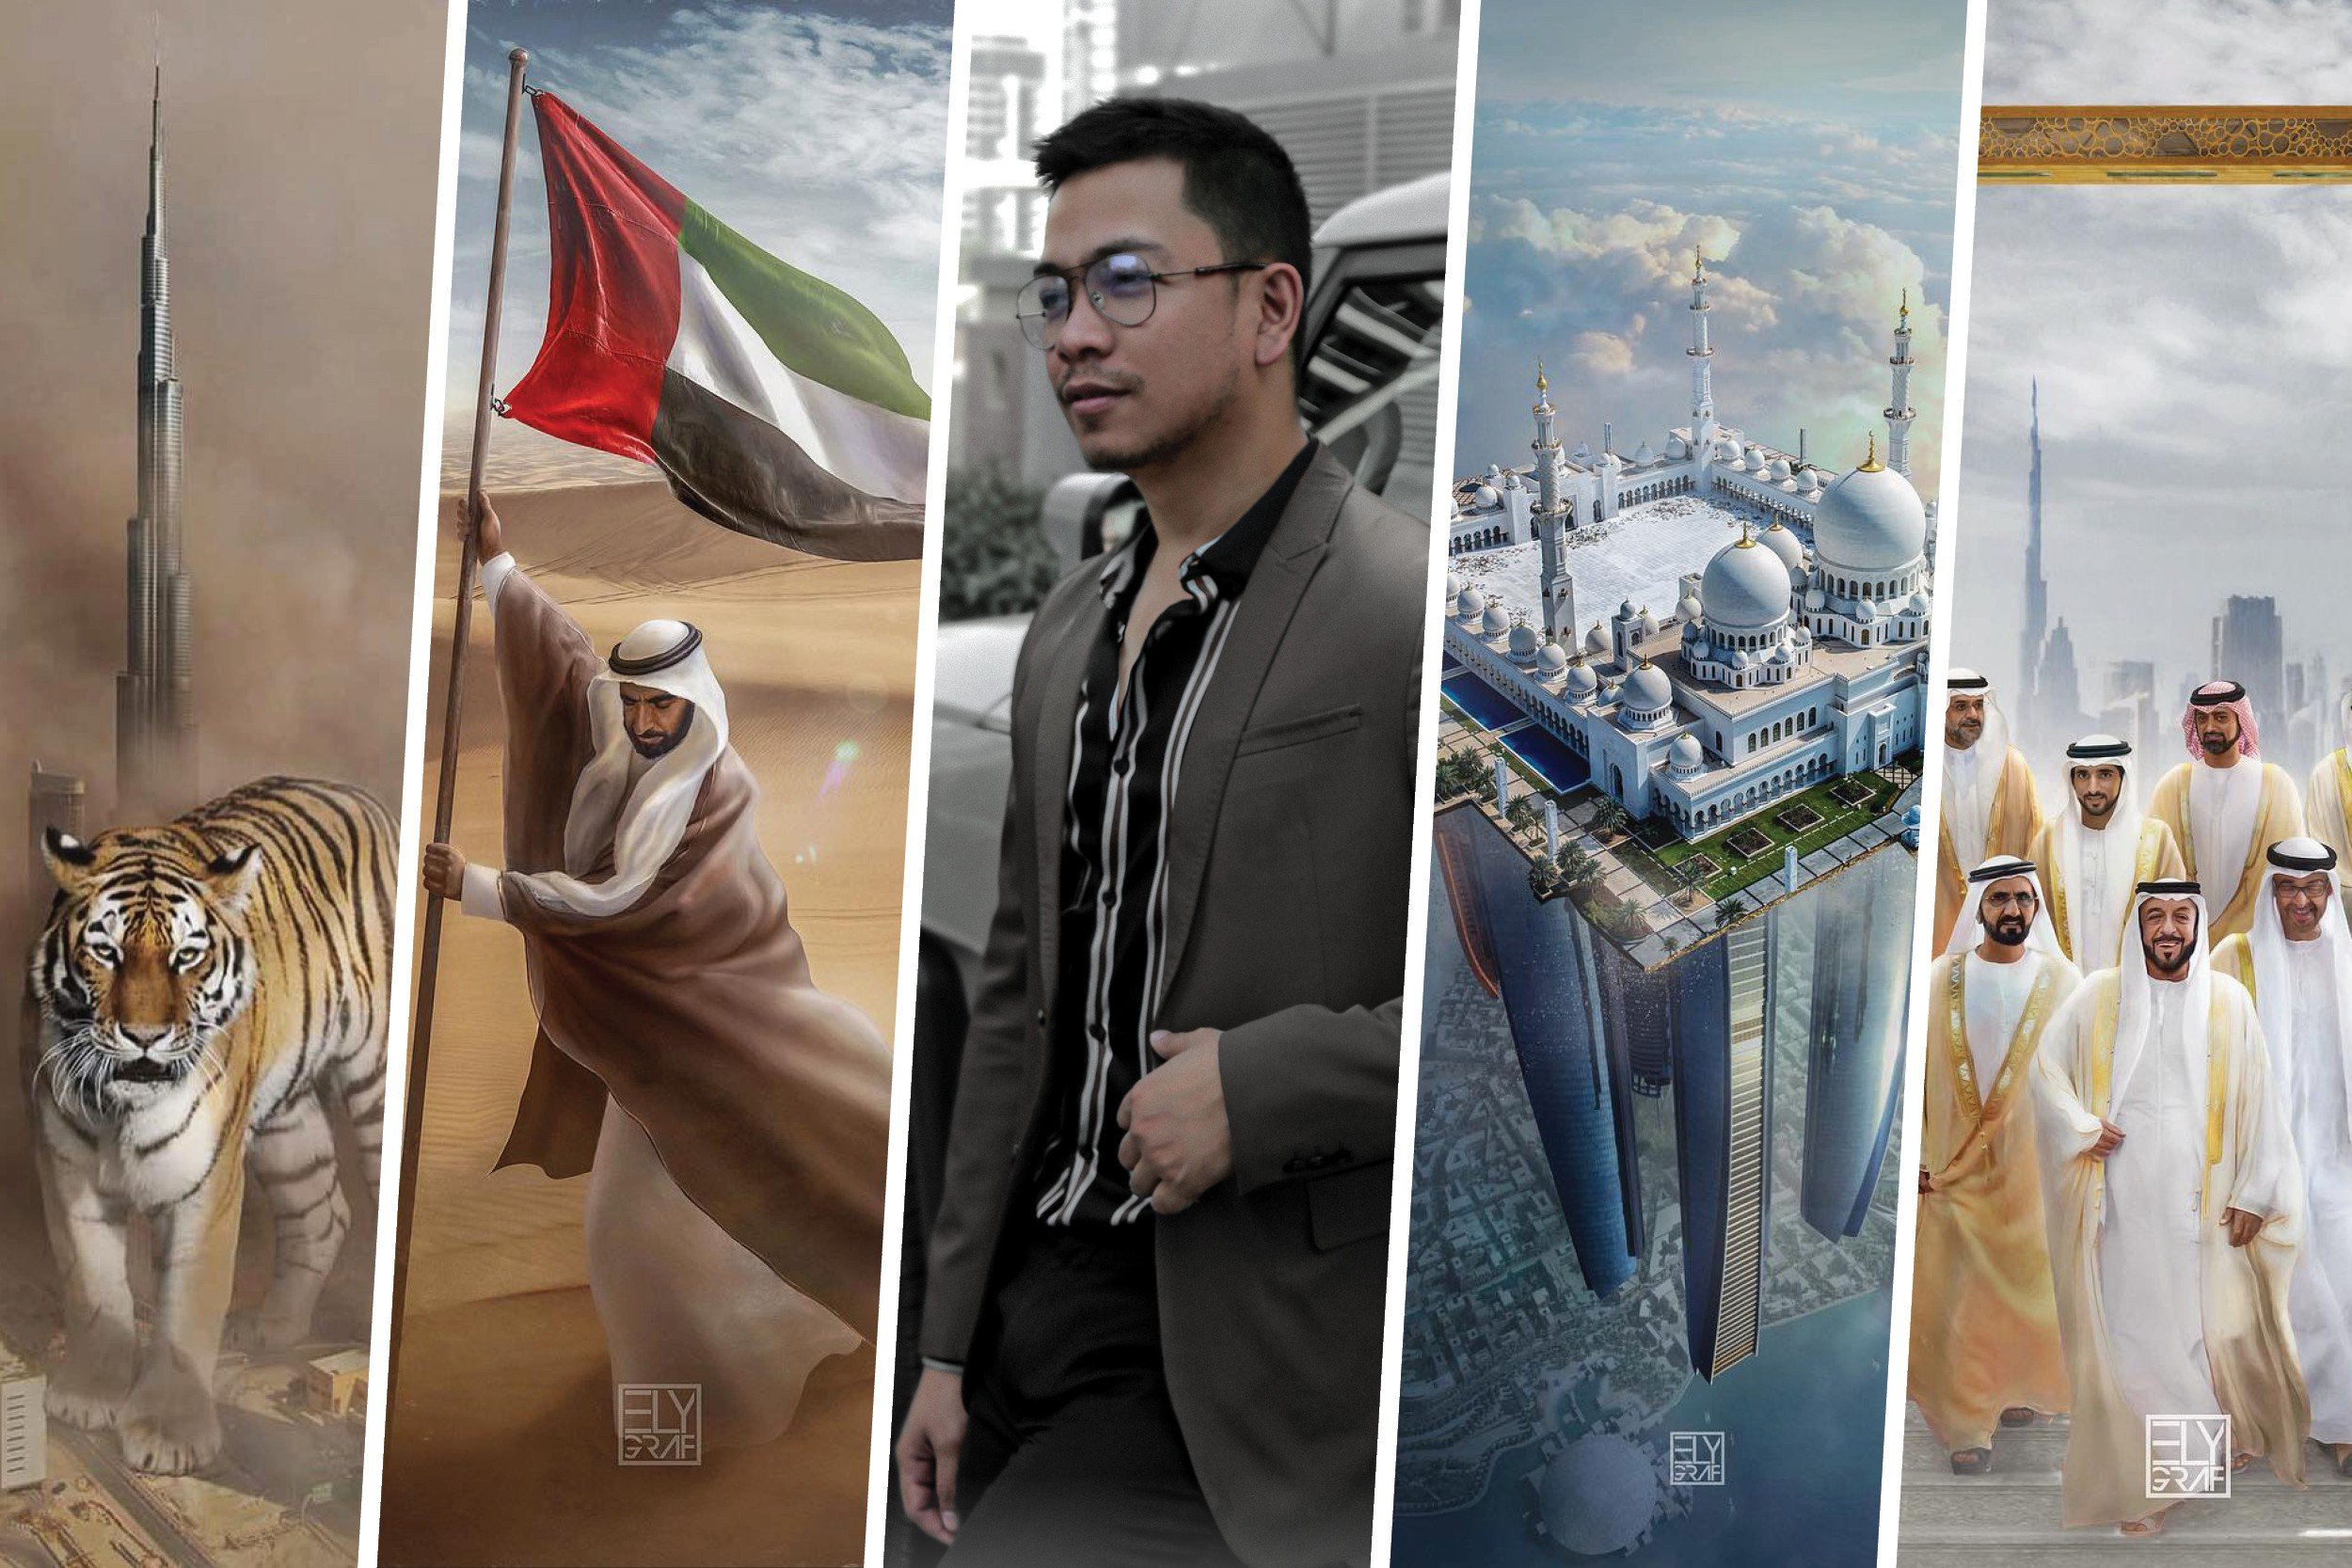 Filipino artist Ely Caluag is known for his UAE-inspired works in both digital and traditional art form. Photo: Instagram and Handout